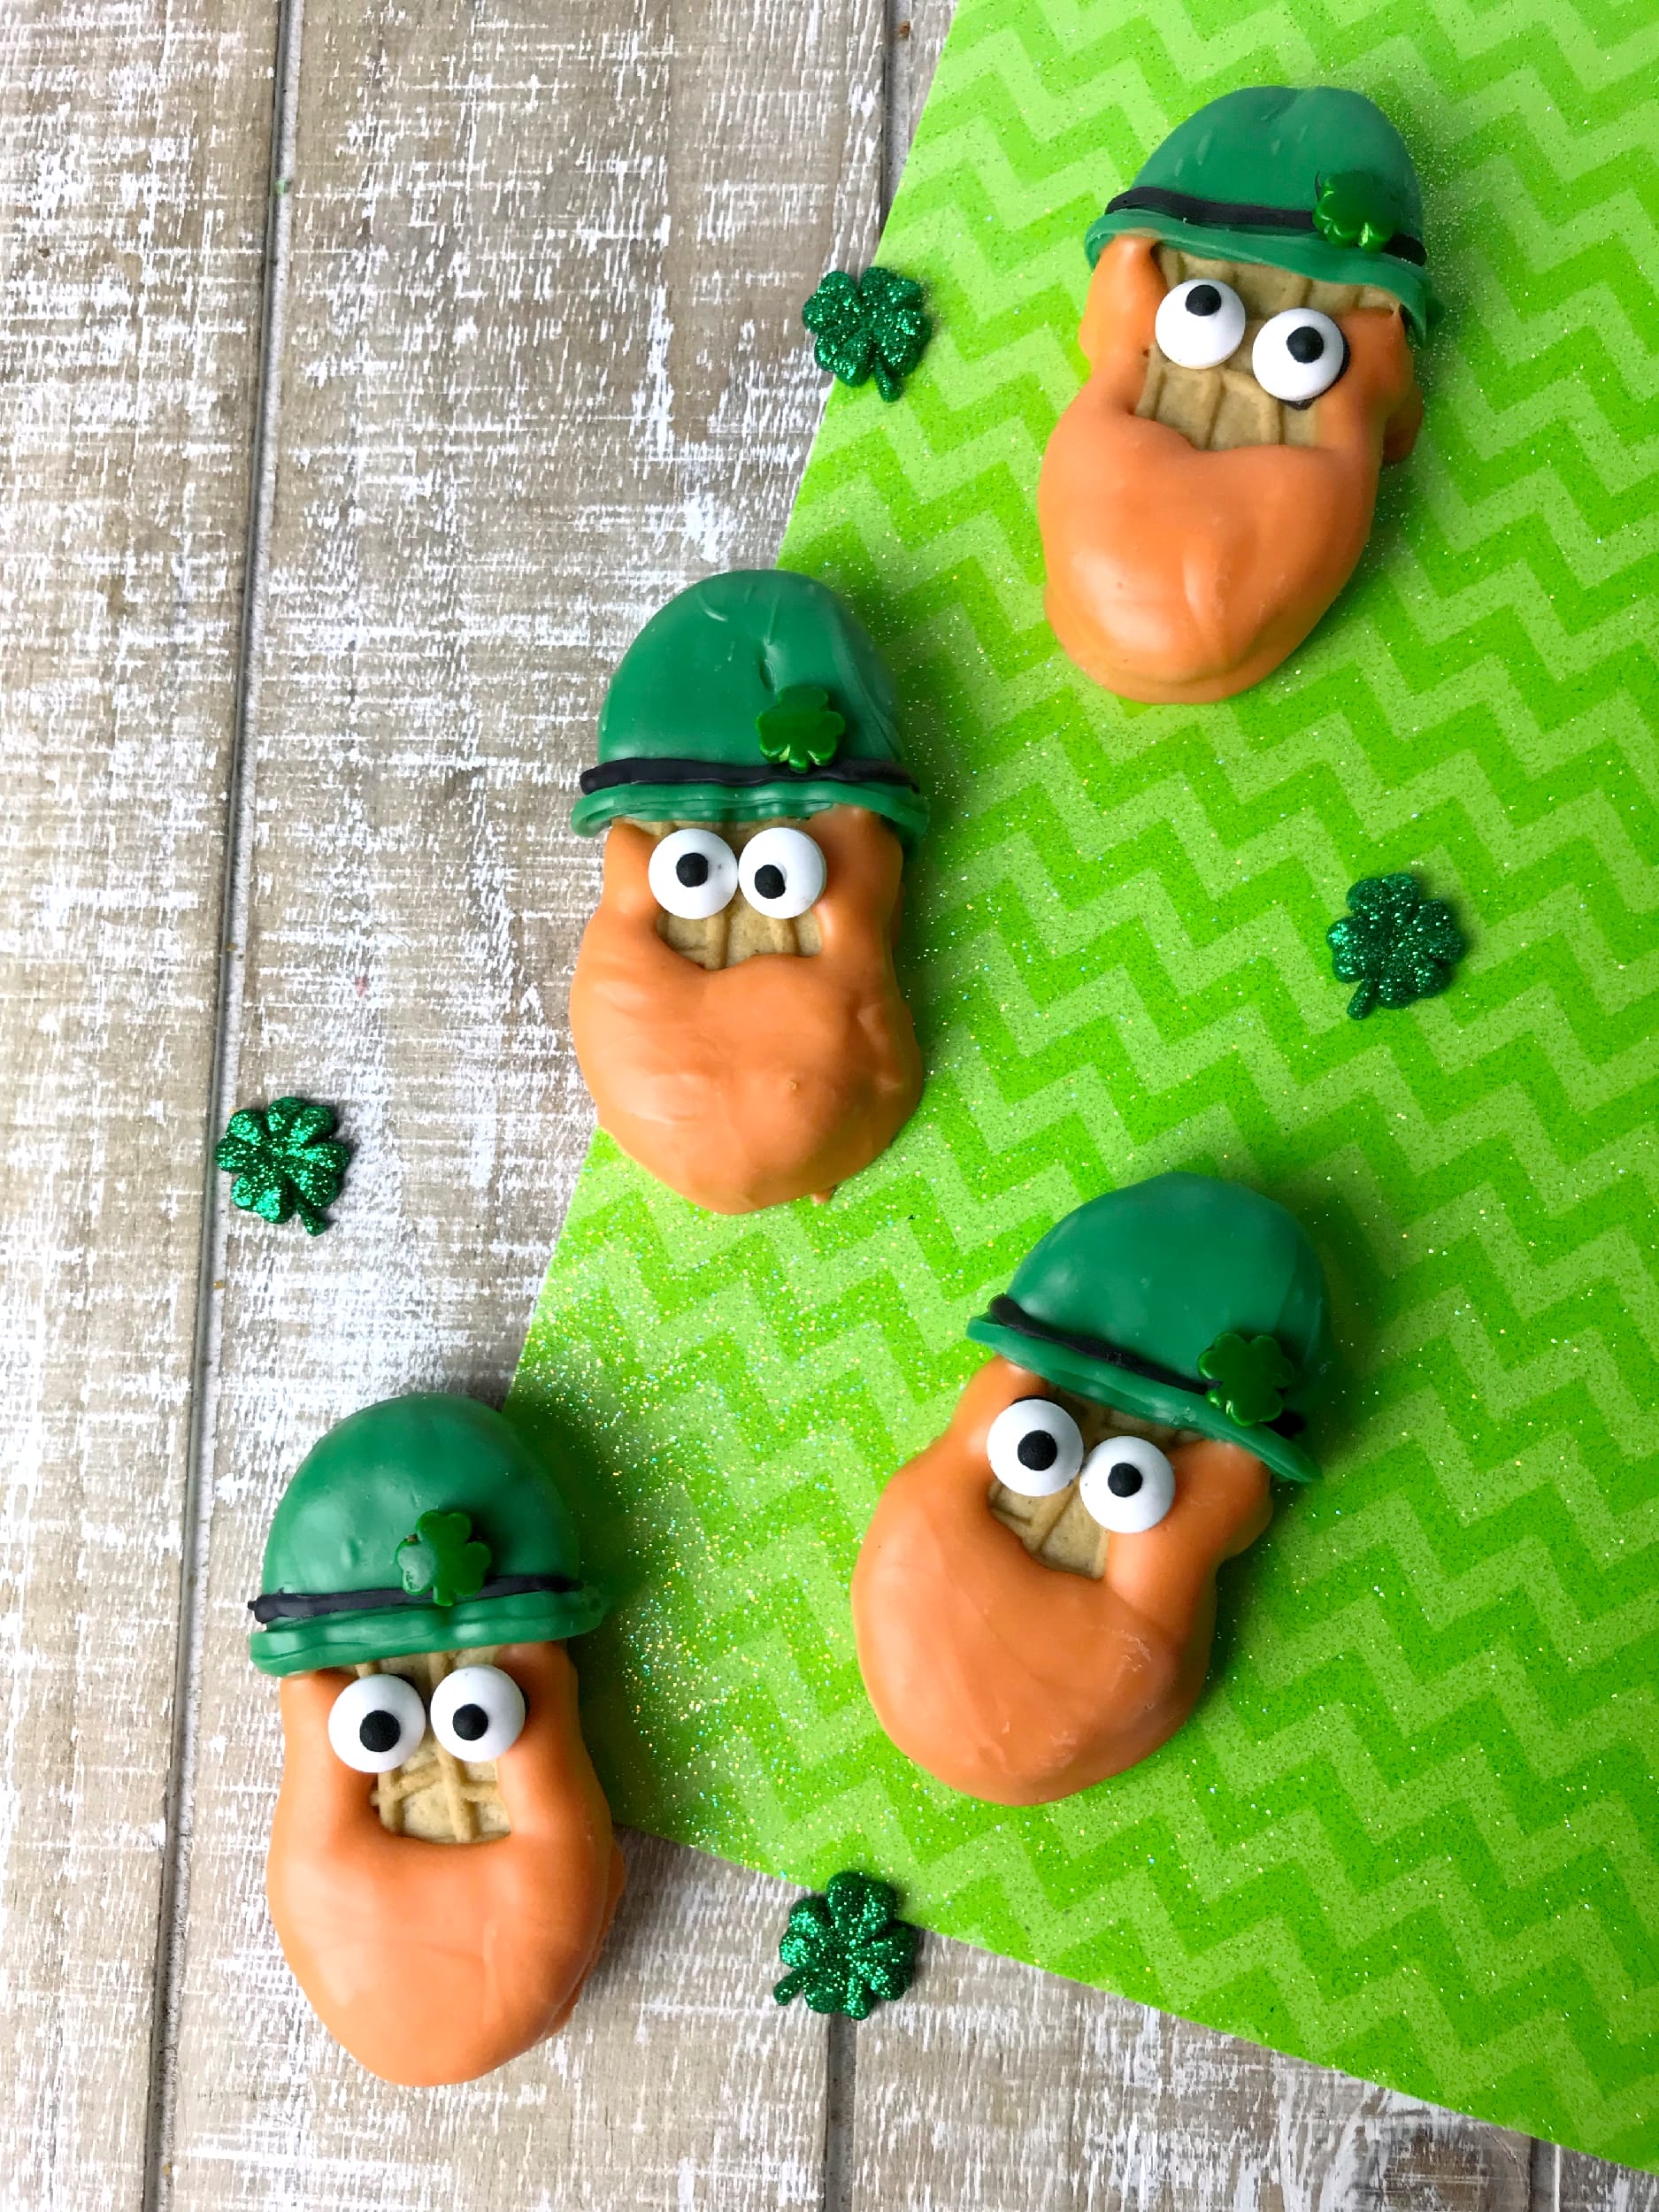 If you want the cutest St Patrick's Day cookies, you want to make these adorable Leprechaun Cookies made with Nutter Butters. These cookies look so cute and they are super easy to make. Perfect for a St. Patrick's  Day party for kids and adults alike.